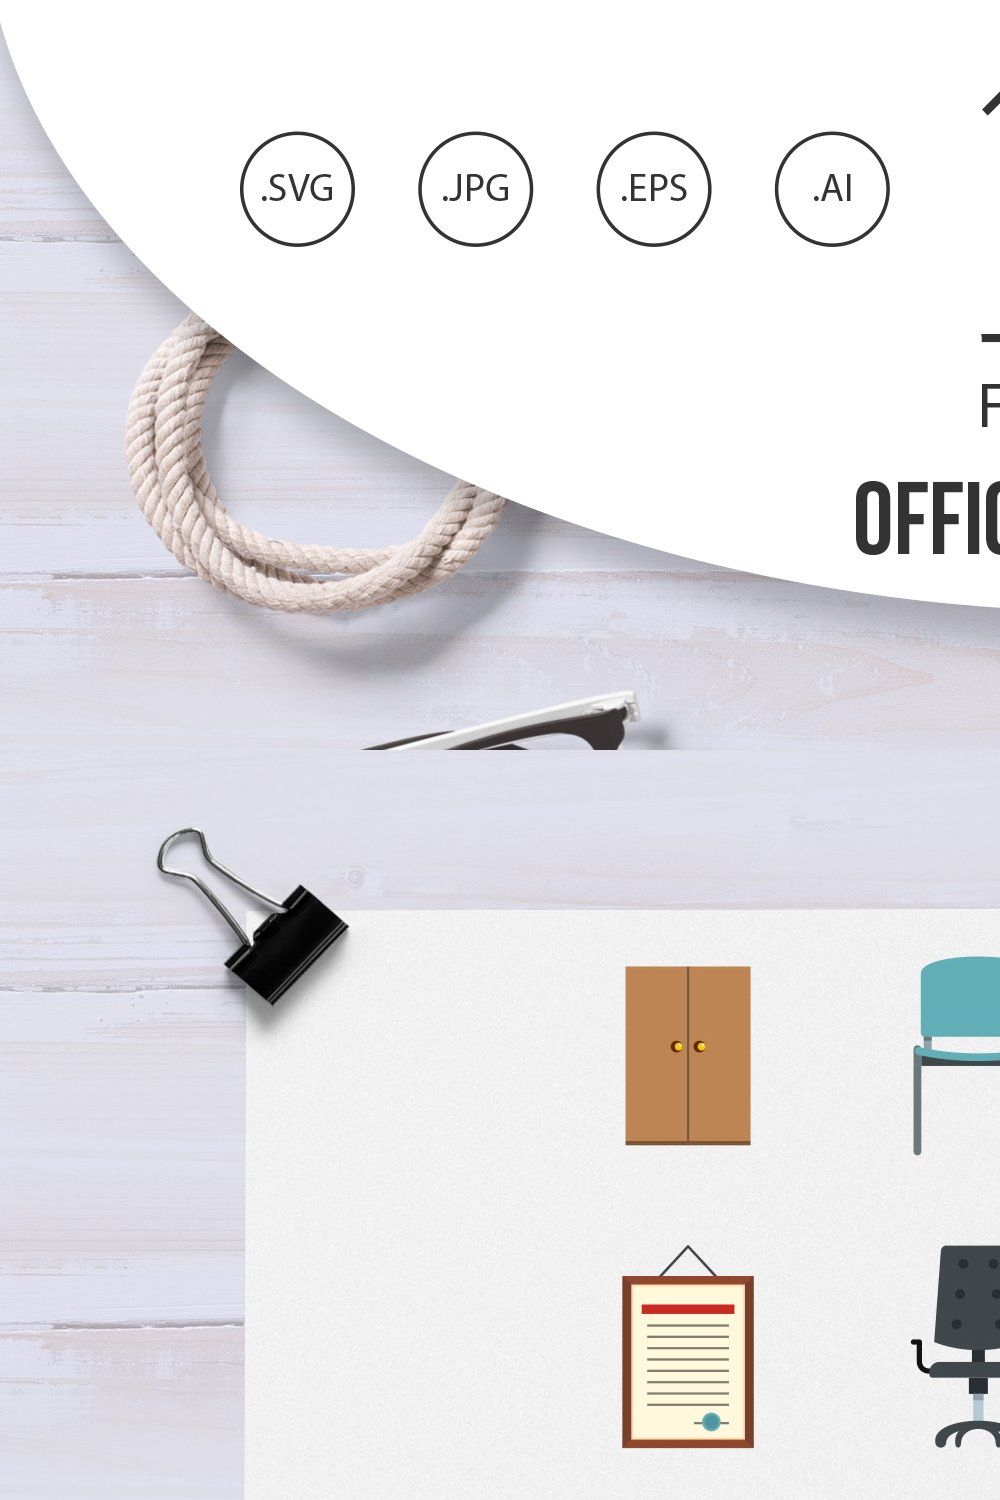 Office furniture icons set in flat pinterest preview image.